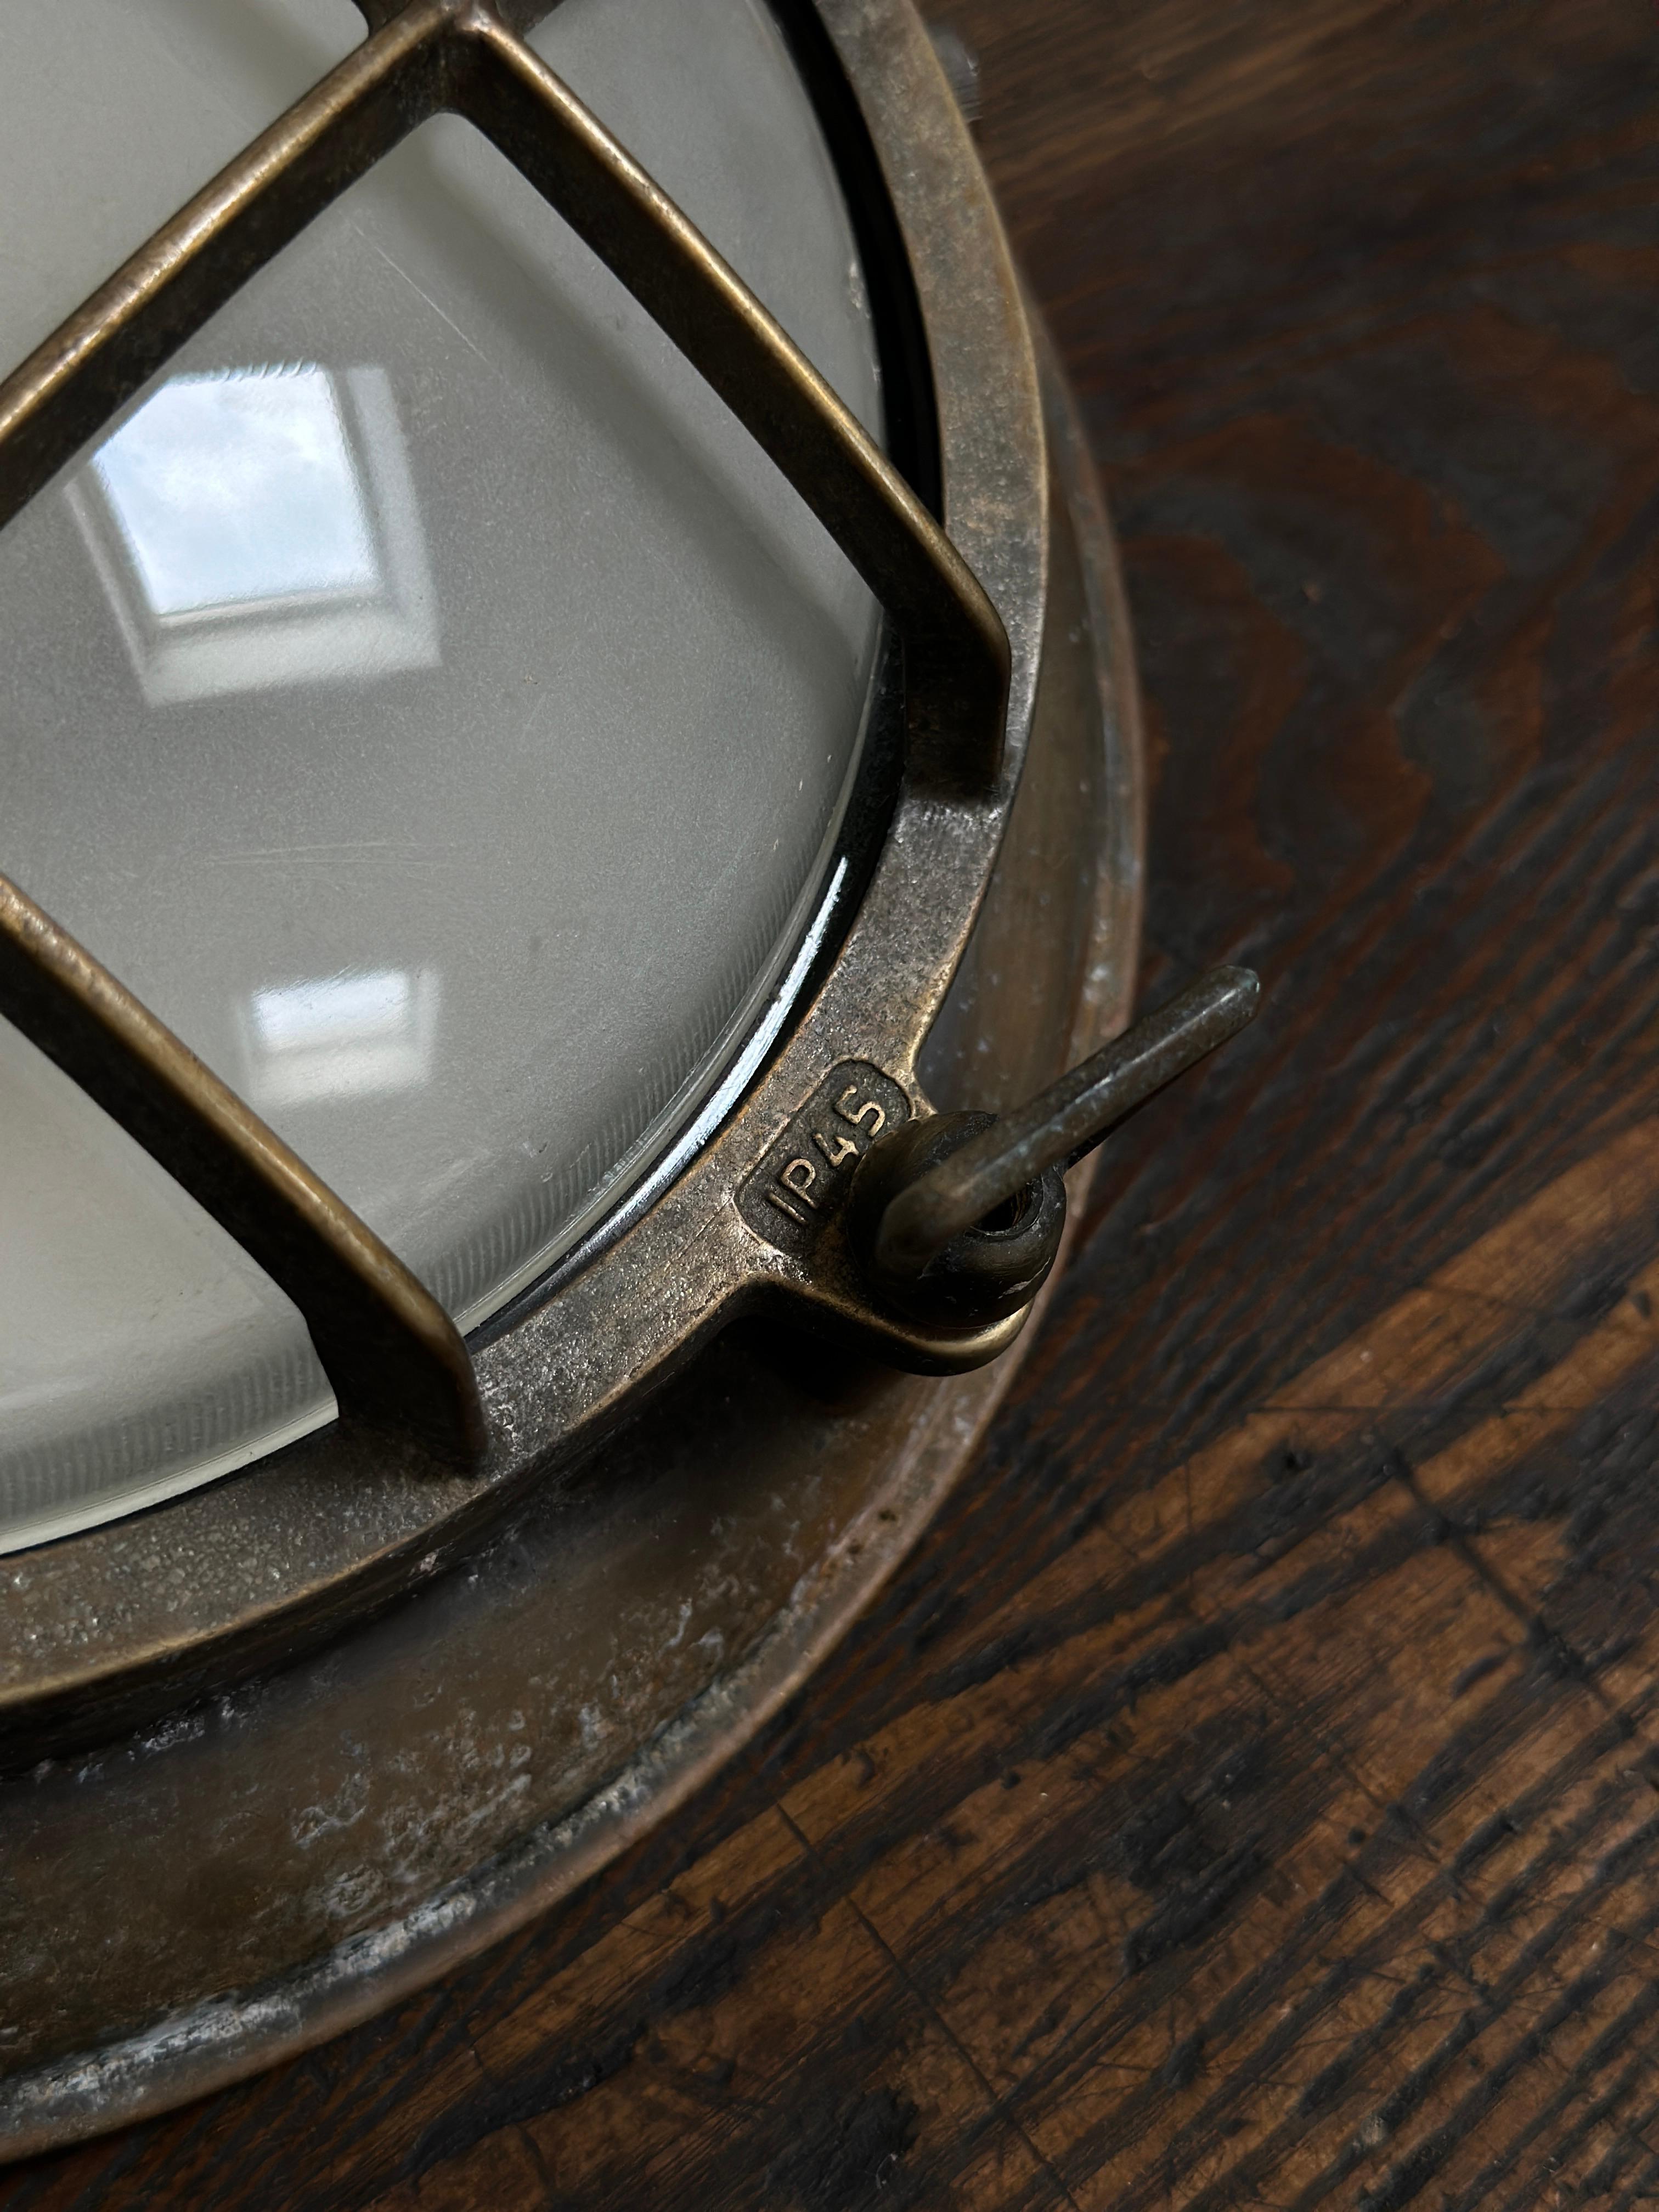 - A pair of brass circular ex-military wall lights with obscure convex glass shades, English circa 1930.
- Wonderful detail across the heavy brass rims each of which are stamped 'P45', the upper cross section unscrews to access the glass and bulb